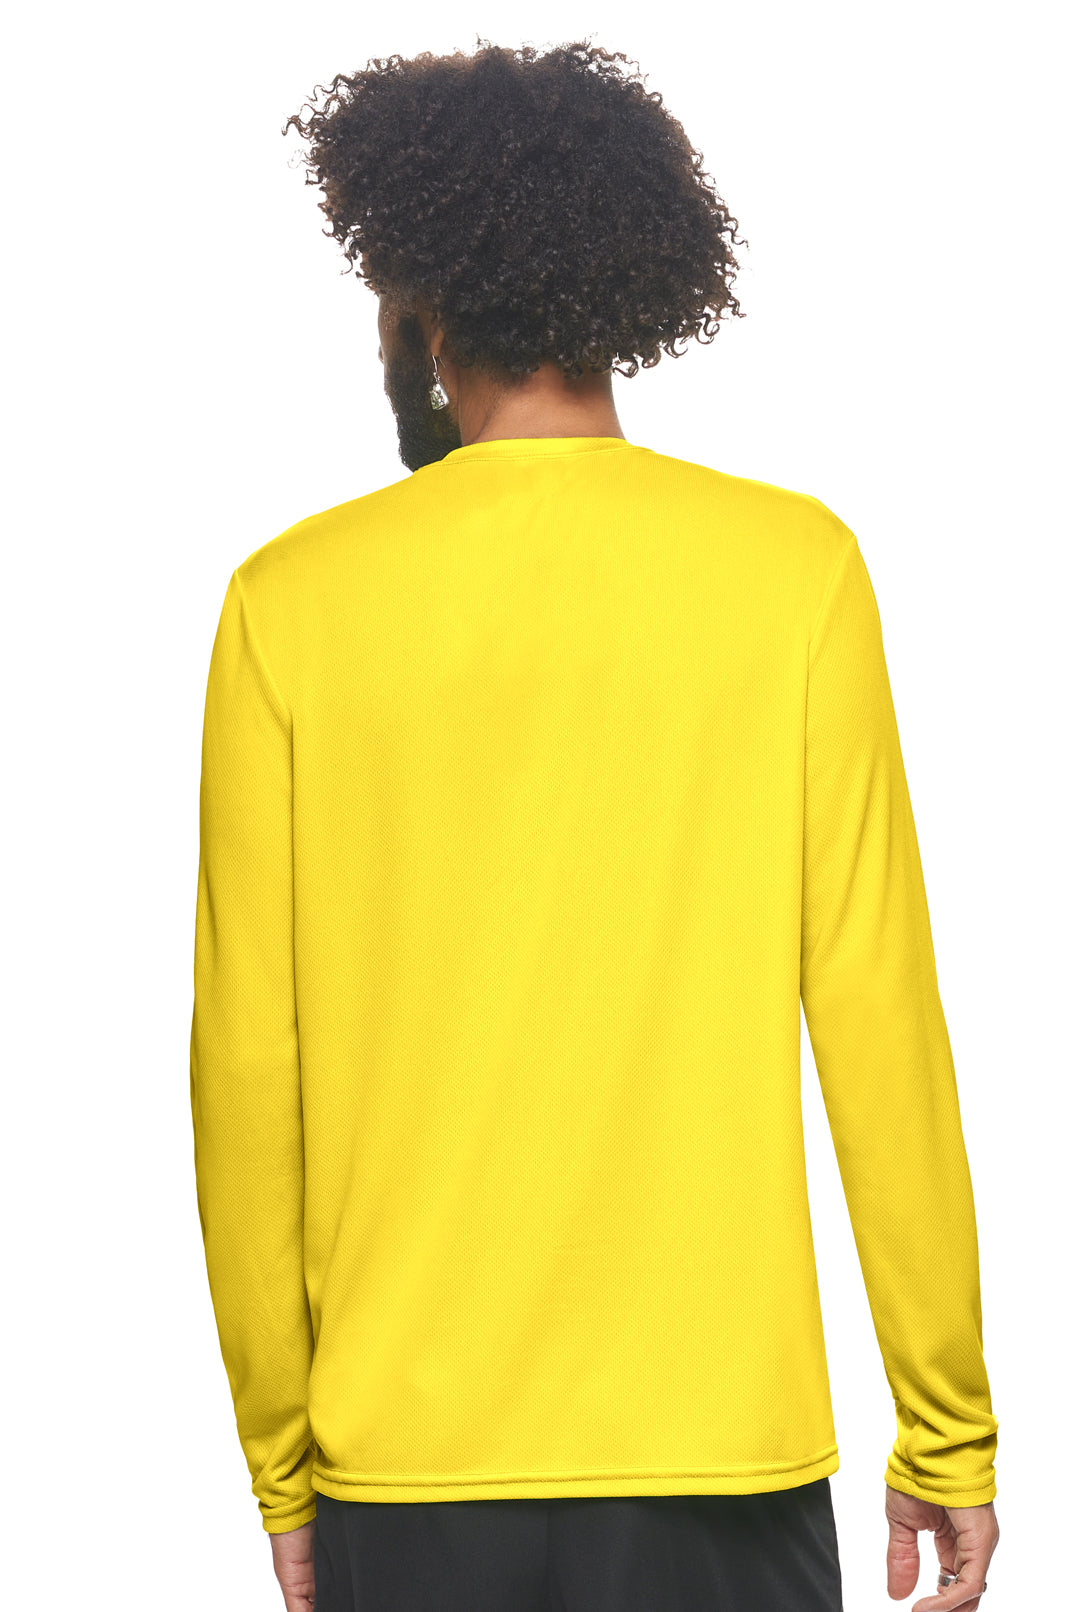 Expert Brand Wholesale Men's Oxymesh Performance Long Sleeve Tec Tee Made in USA AJ901D Bright Yellow Image 3#bright-yellow